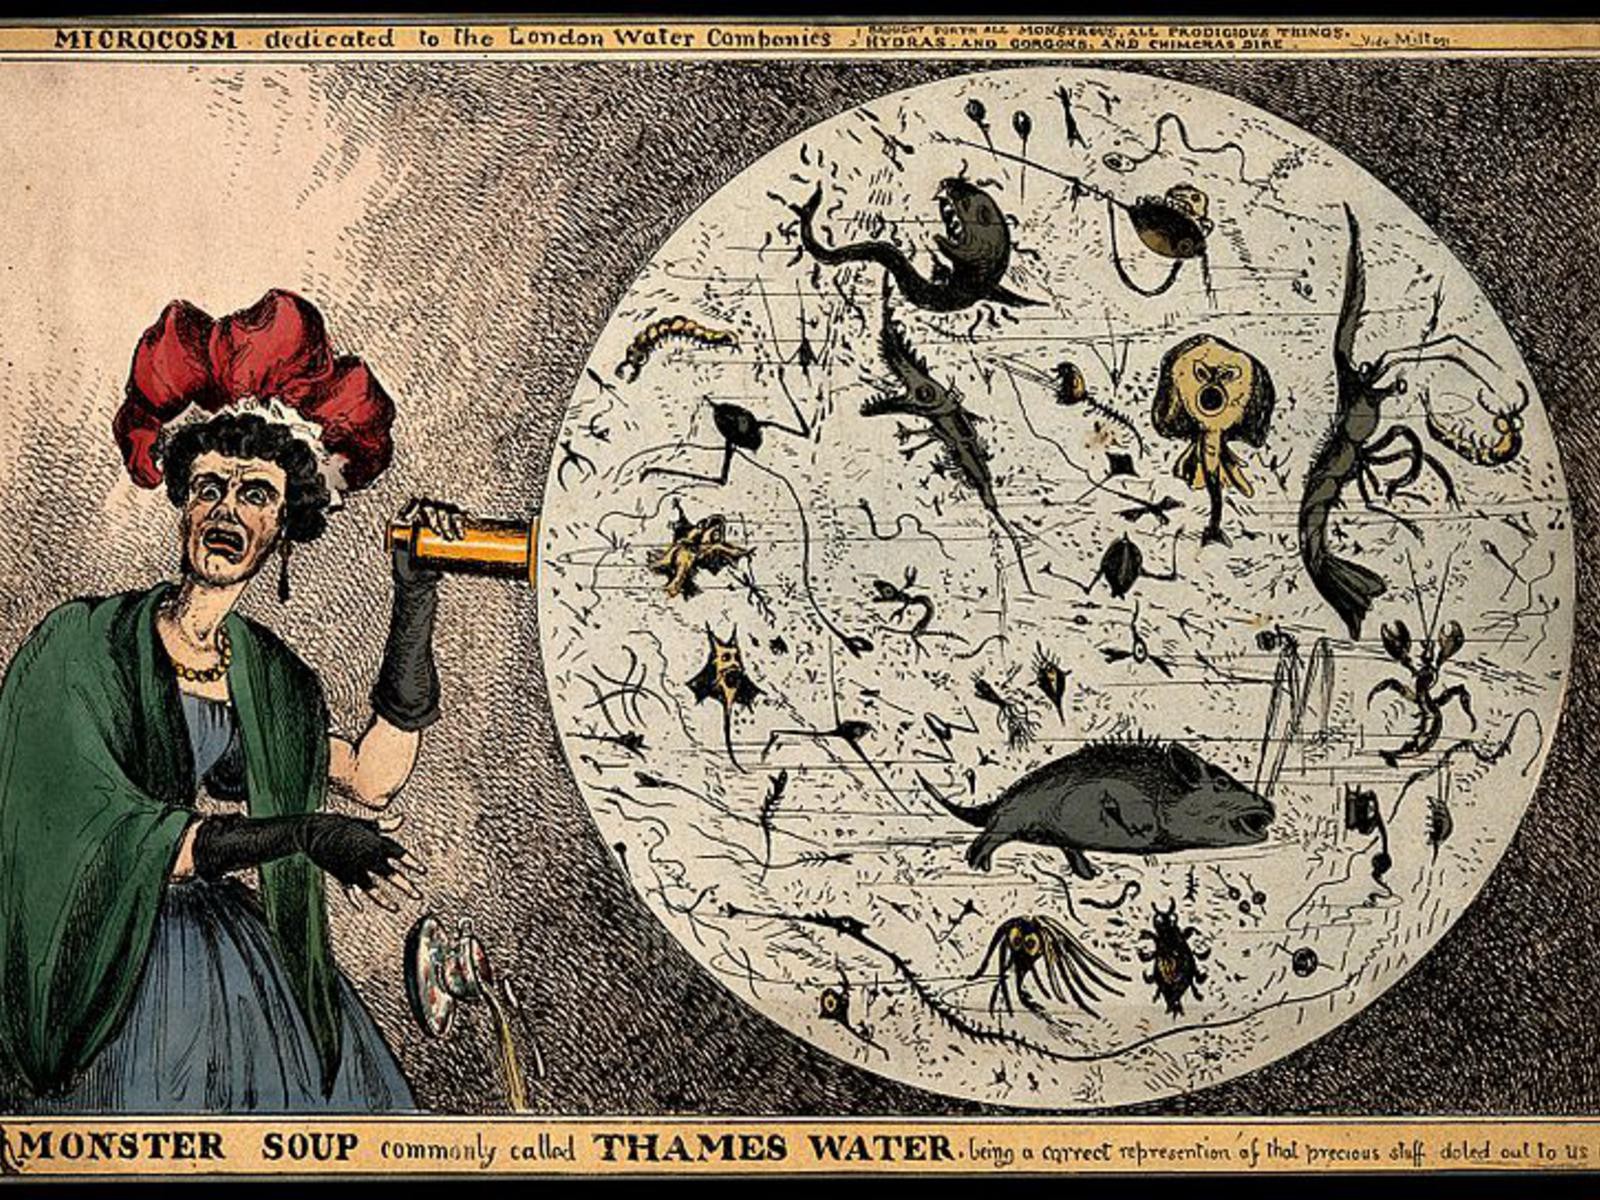 A woman in formal attire holds a microscope in one hand, and turns to look at the viewer in horror. The microscope lens is blown-up larger to show a dense collections of microscopic animals and organisms. The caption reads: "A Monster Soup: commonly called Thames Water, being a correct representation of that precious stuff doled out to us!!!"